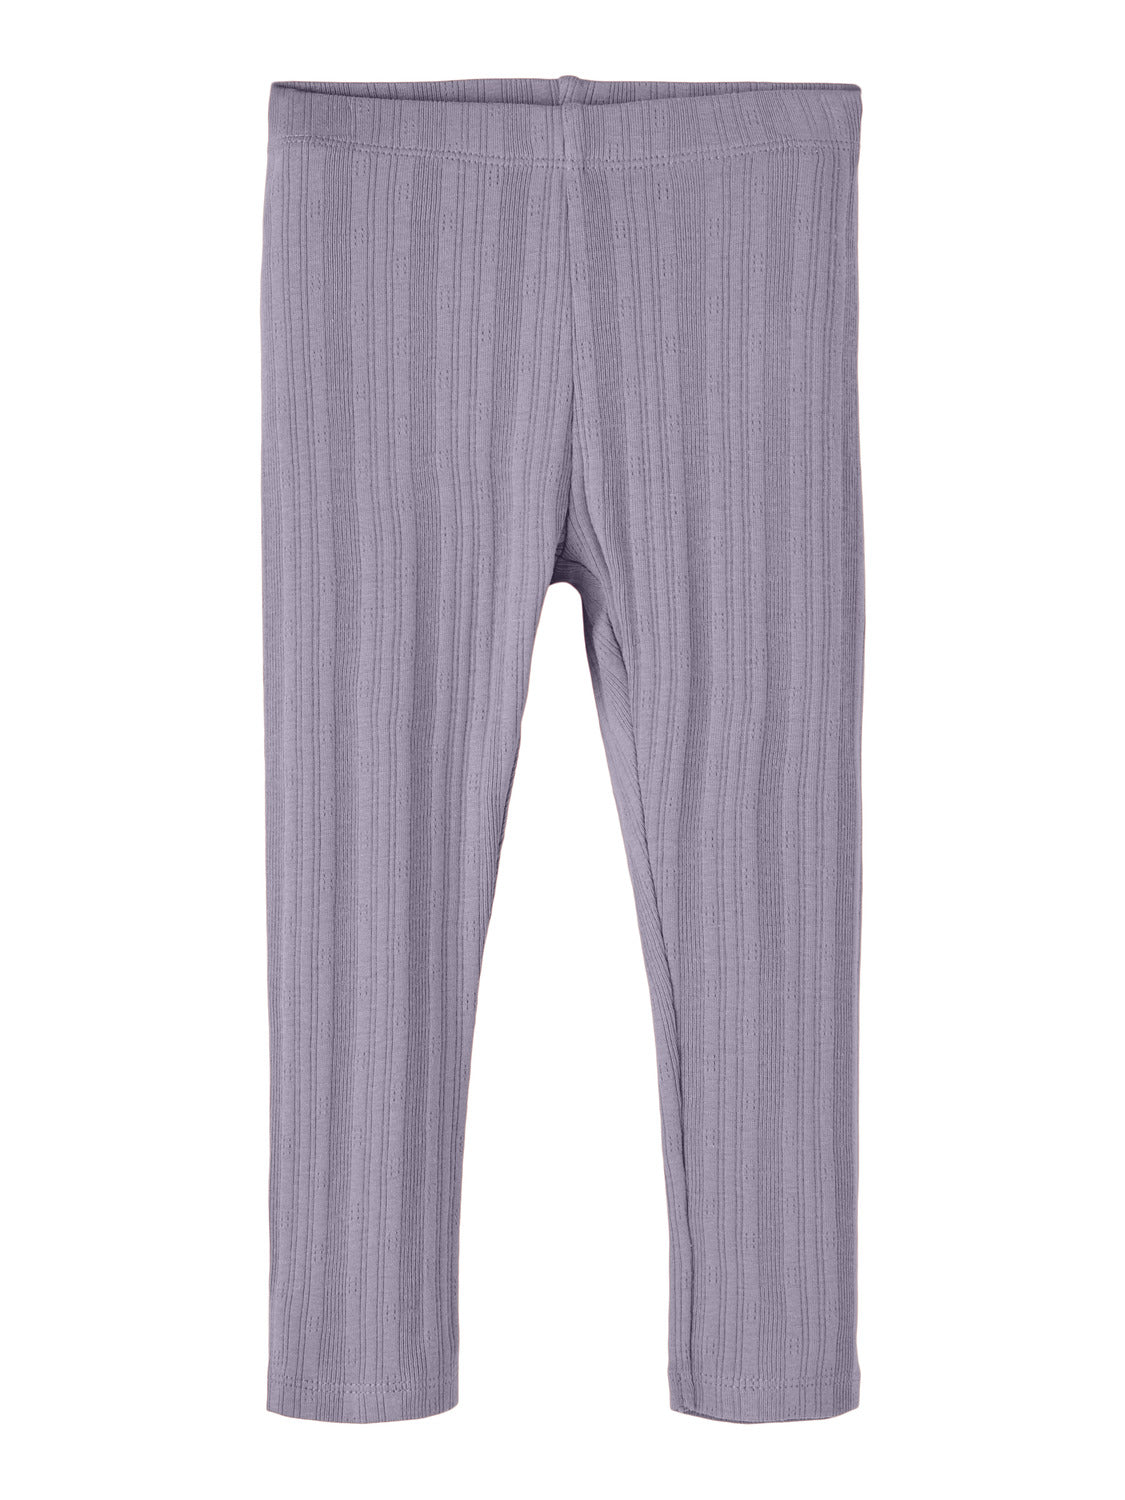 NMFLANNA Trousers - Lavender Gray